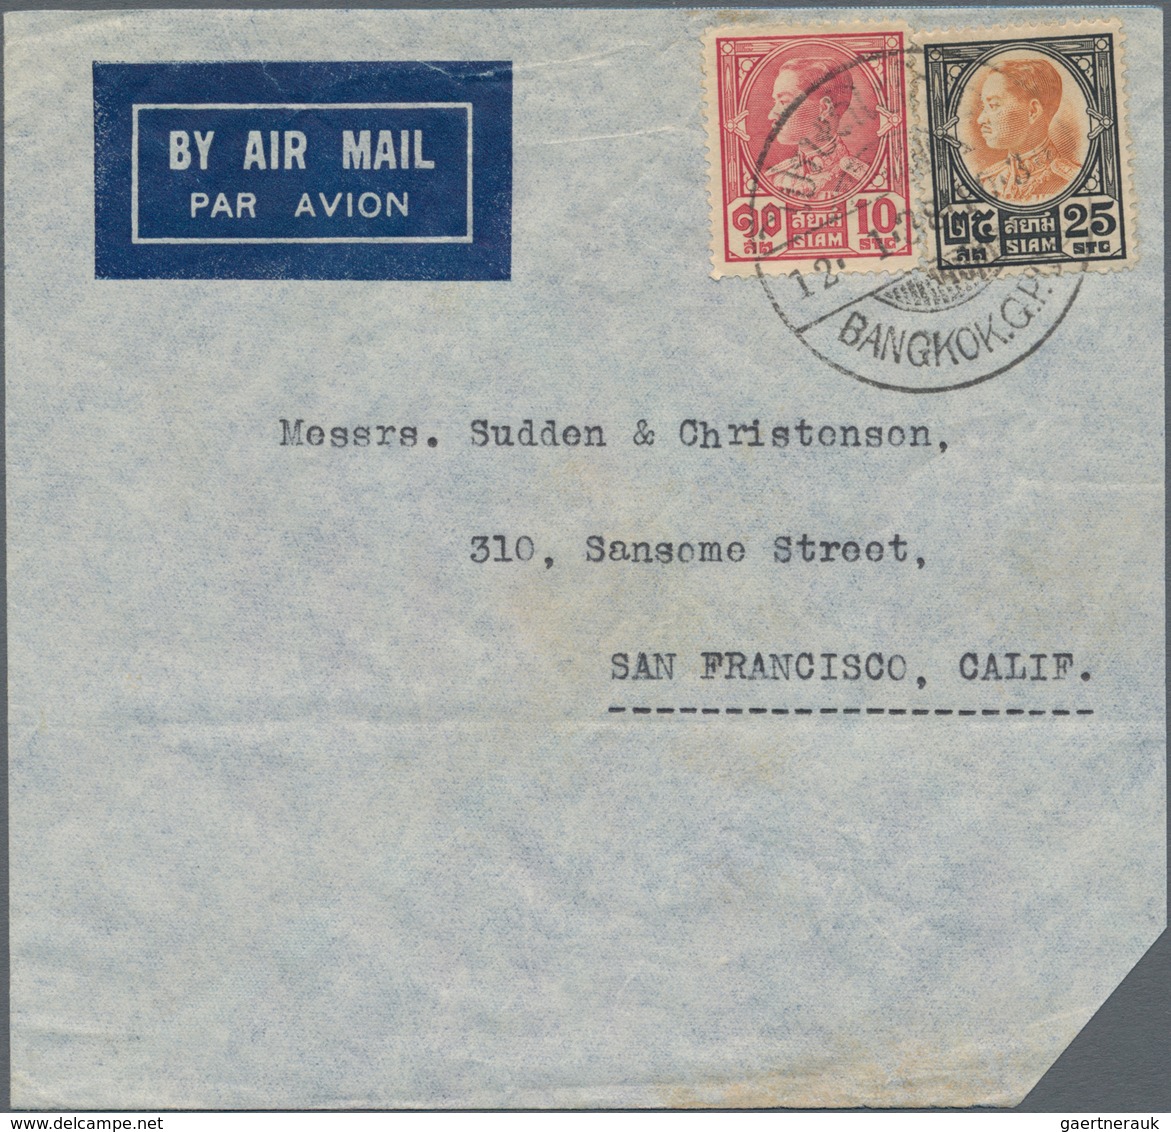 Thailand: 1928/54, airmail covers (4) to overseas inc. 1936 60 S. frank (2s small tear) tied "Bangko